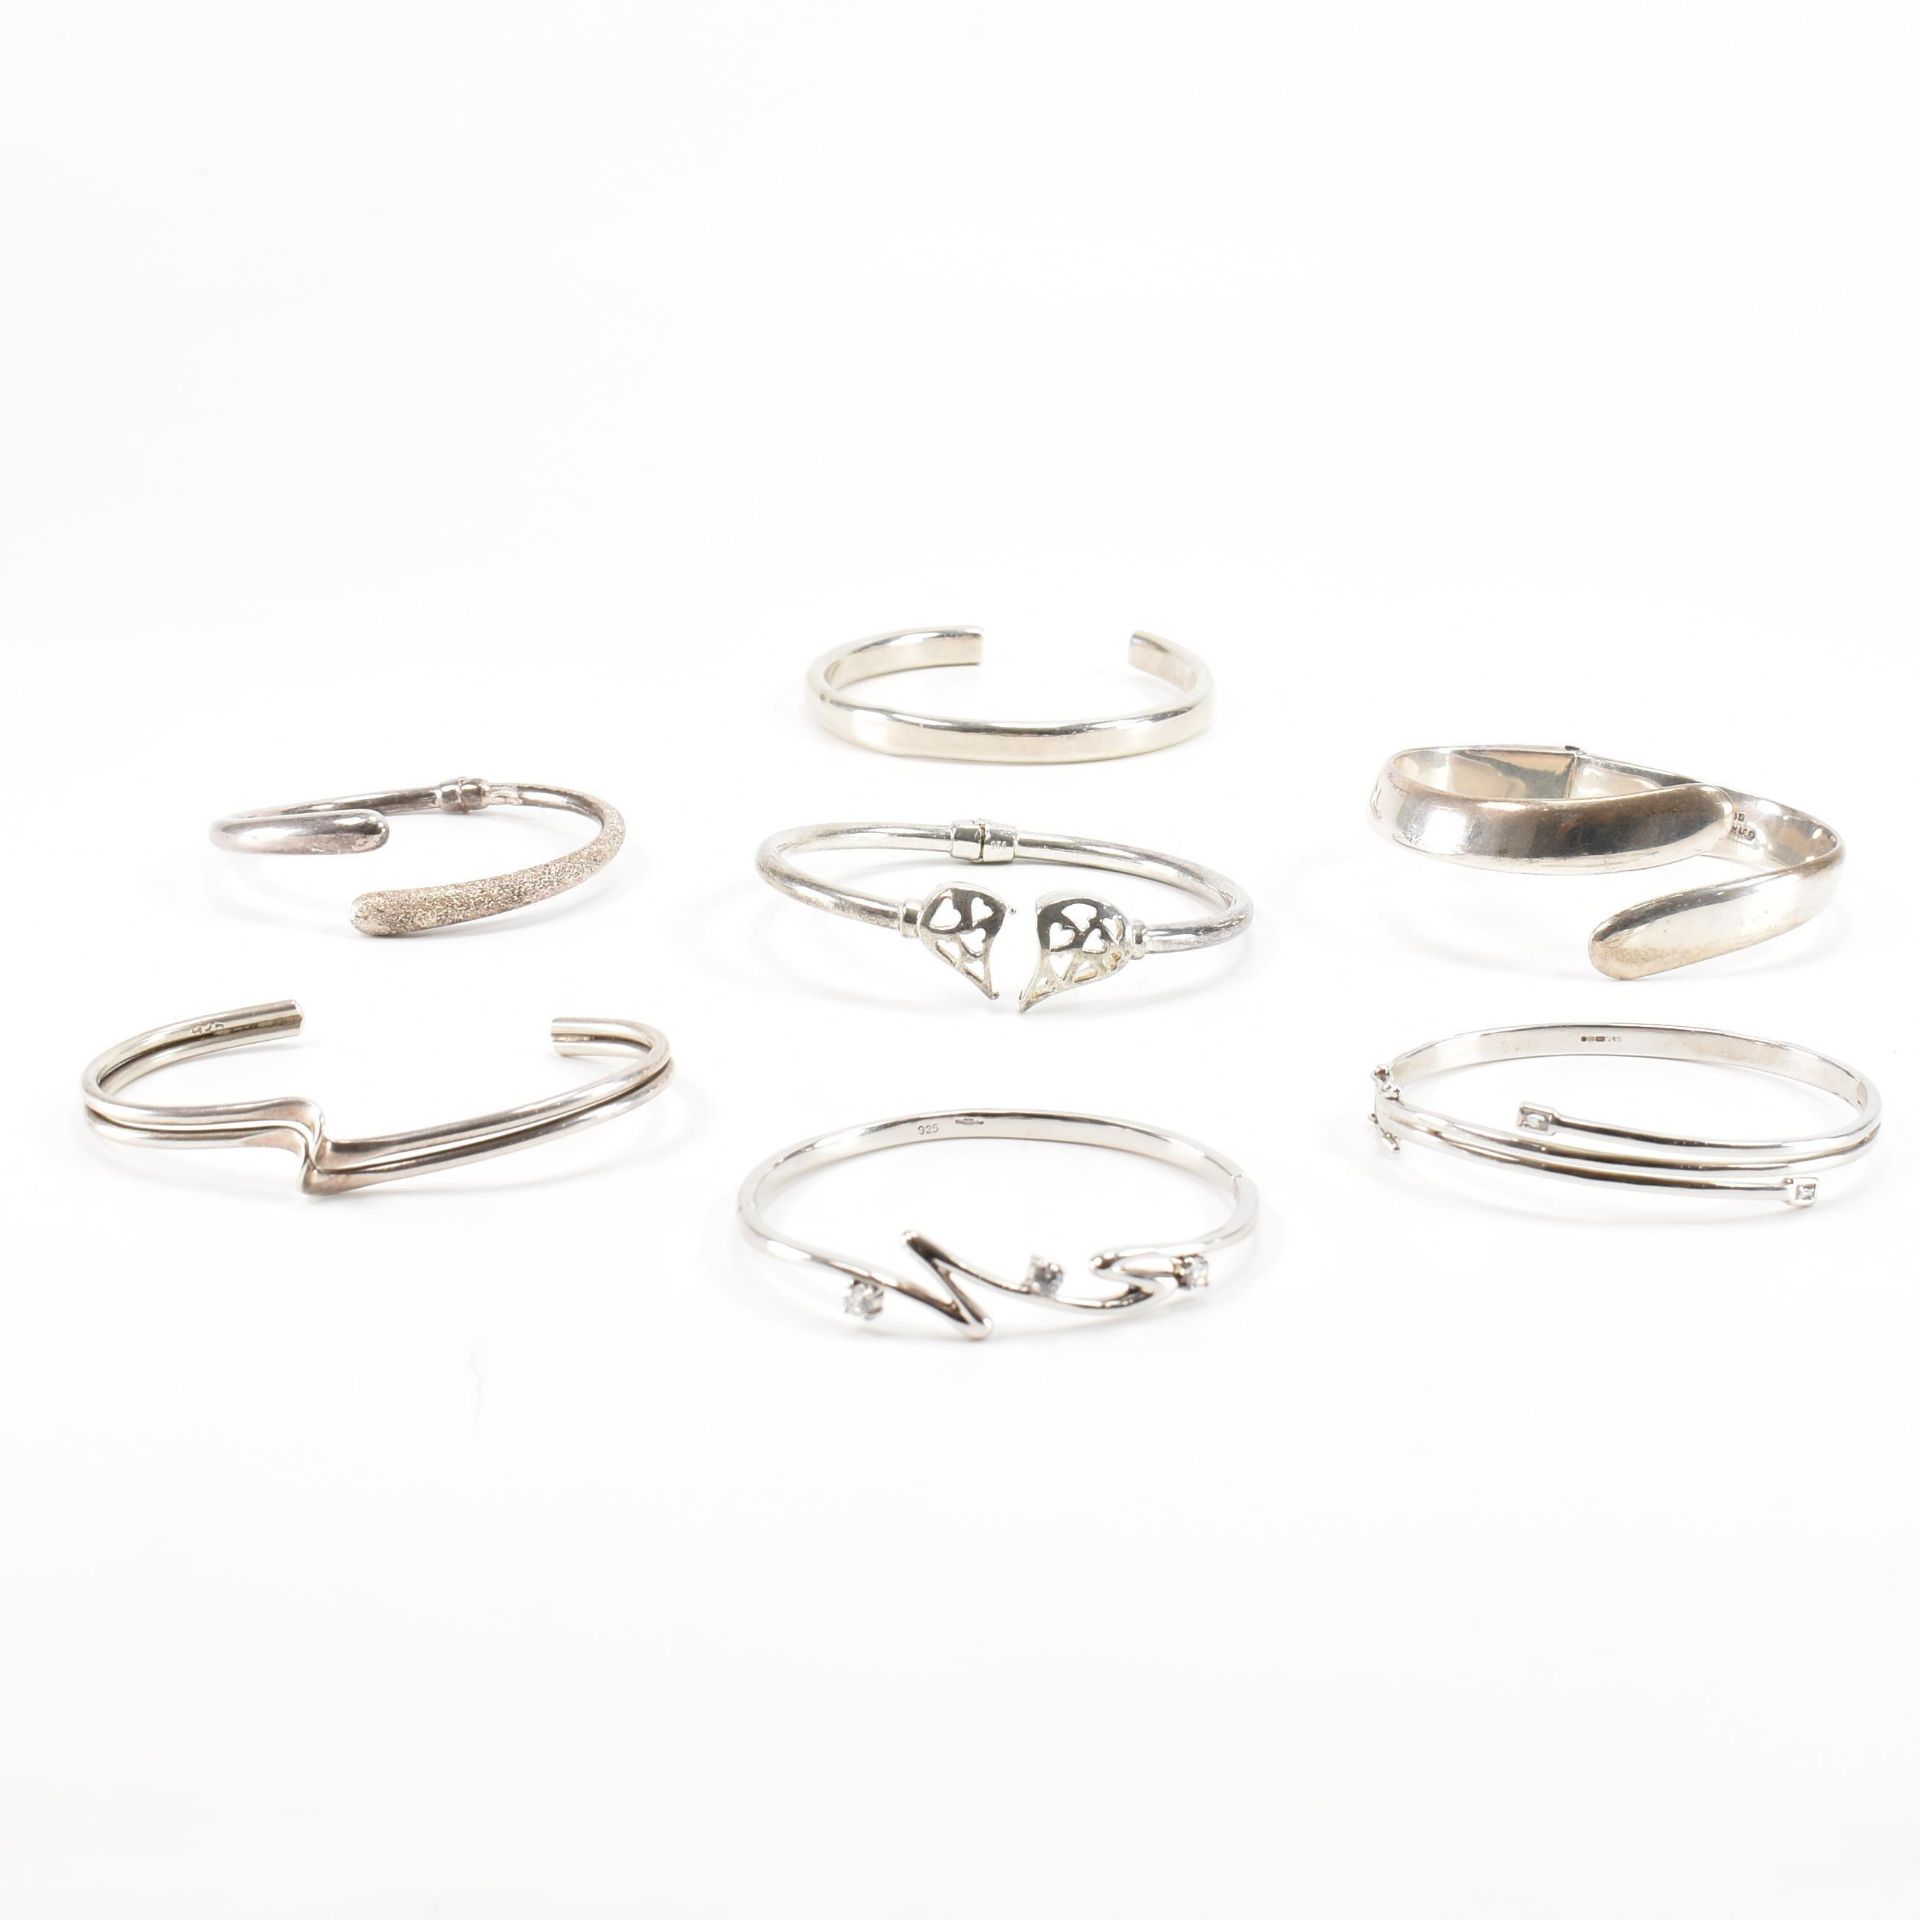 COLLECTION OF ASSORTED 925 SILVER BANGLES